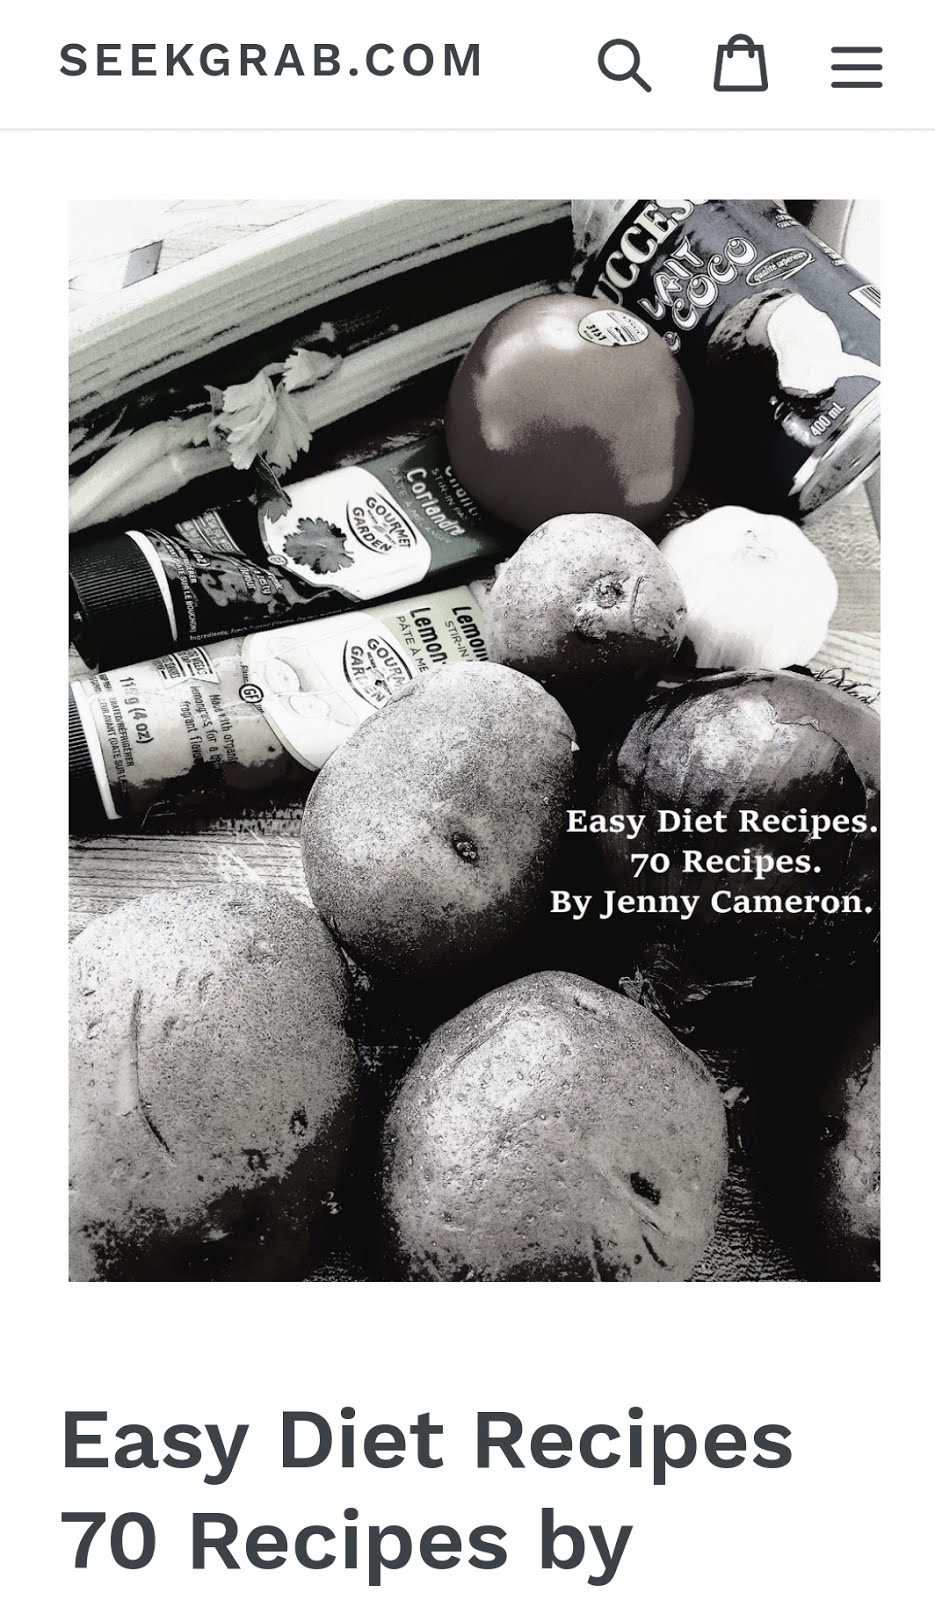 70 Diet Recipes Easy! Request your download here.